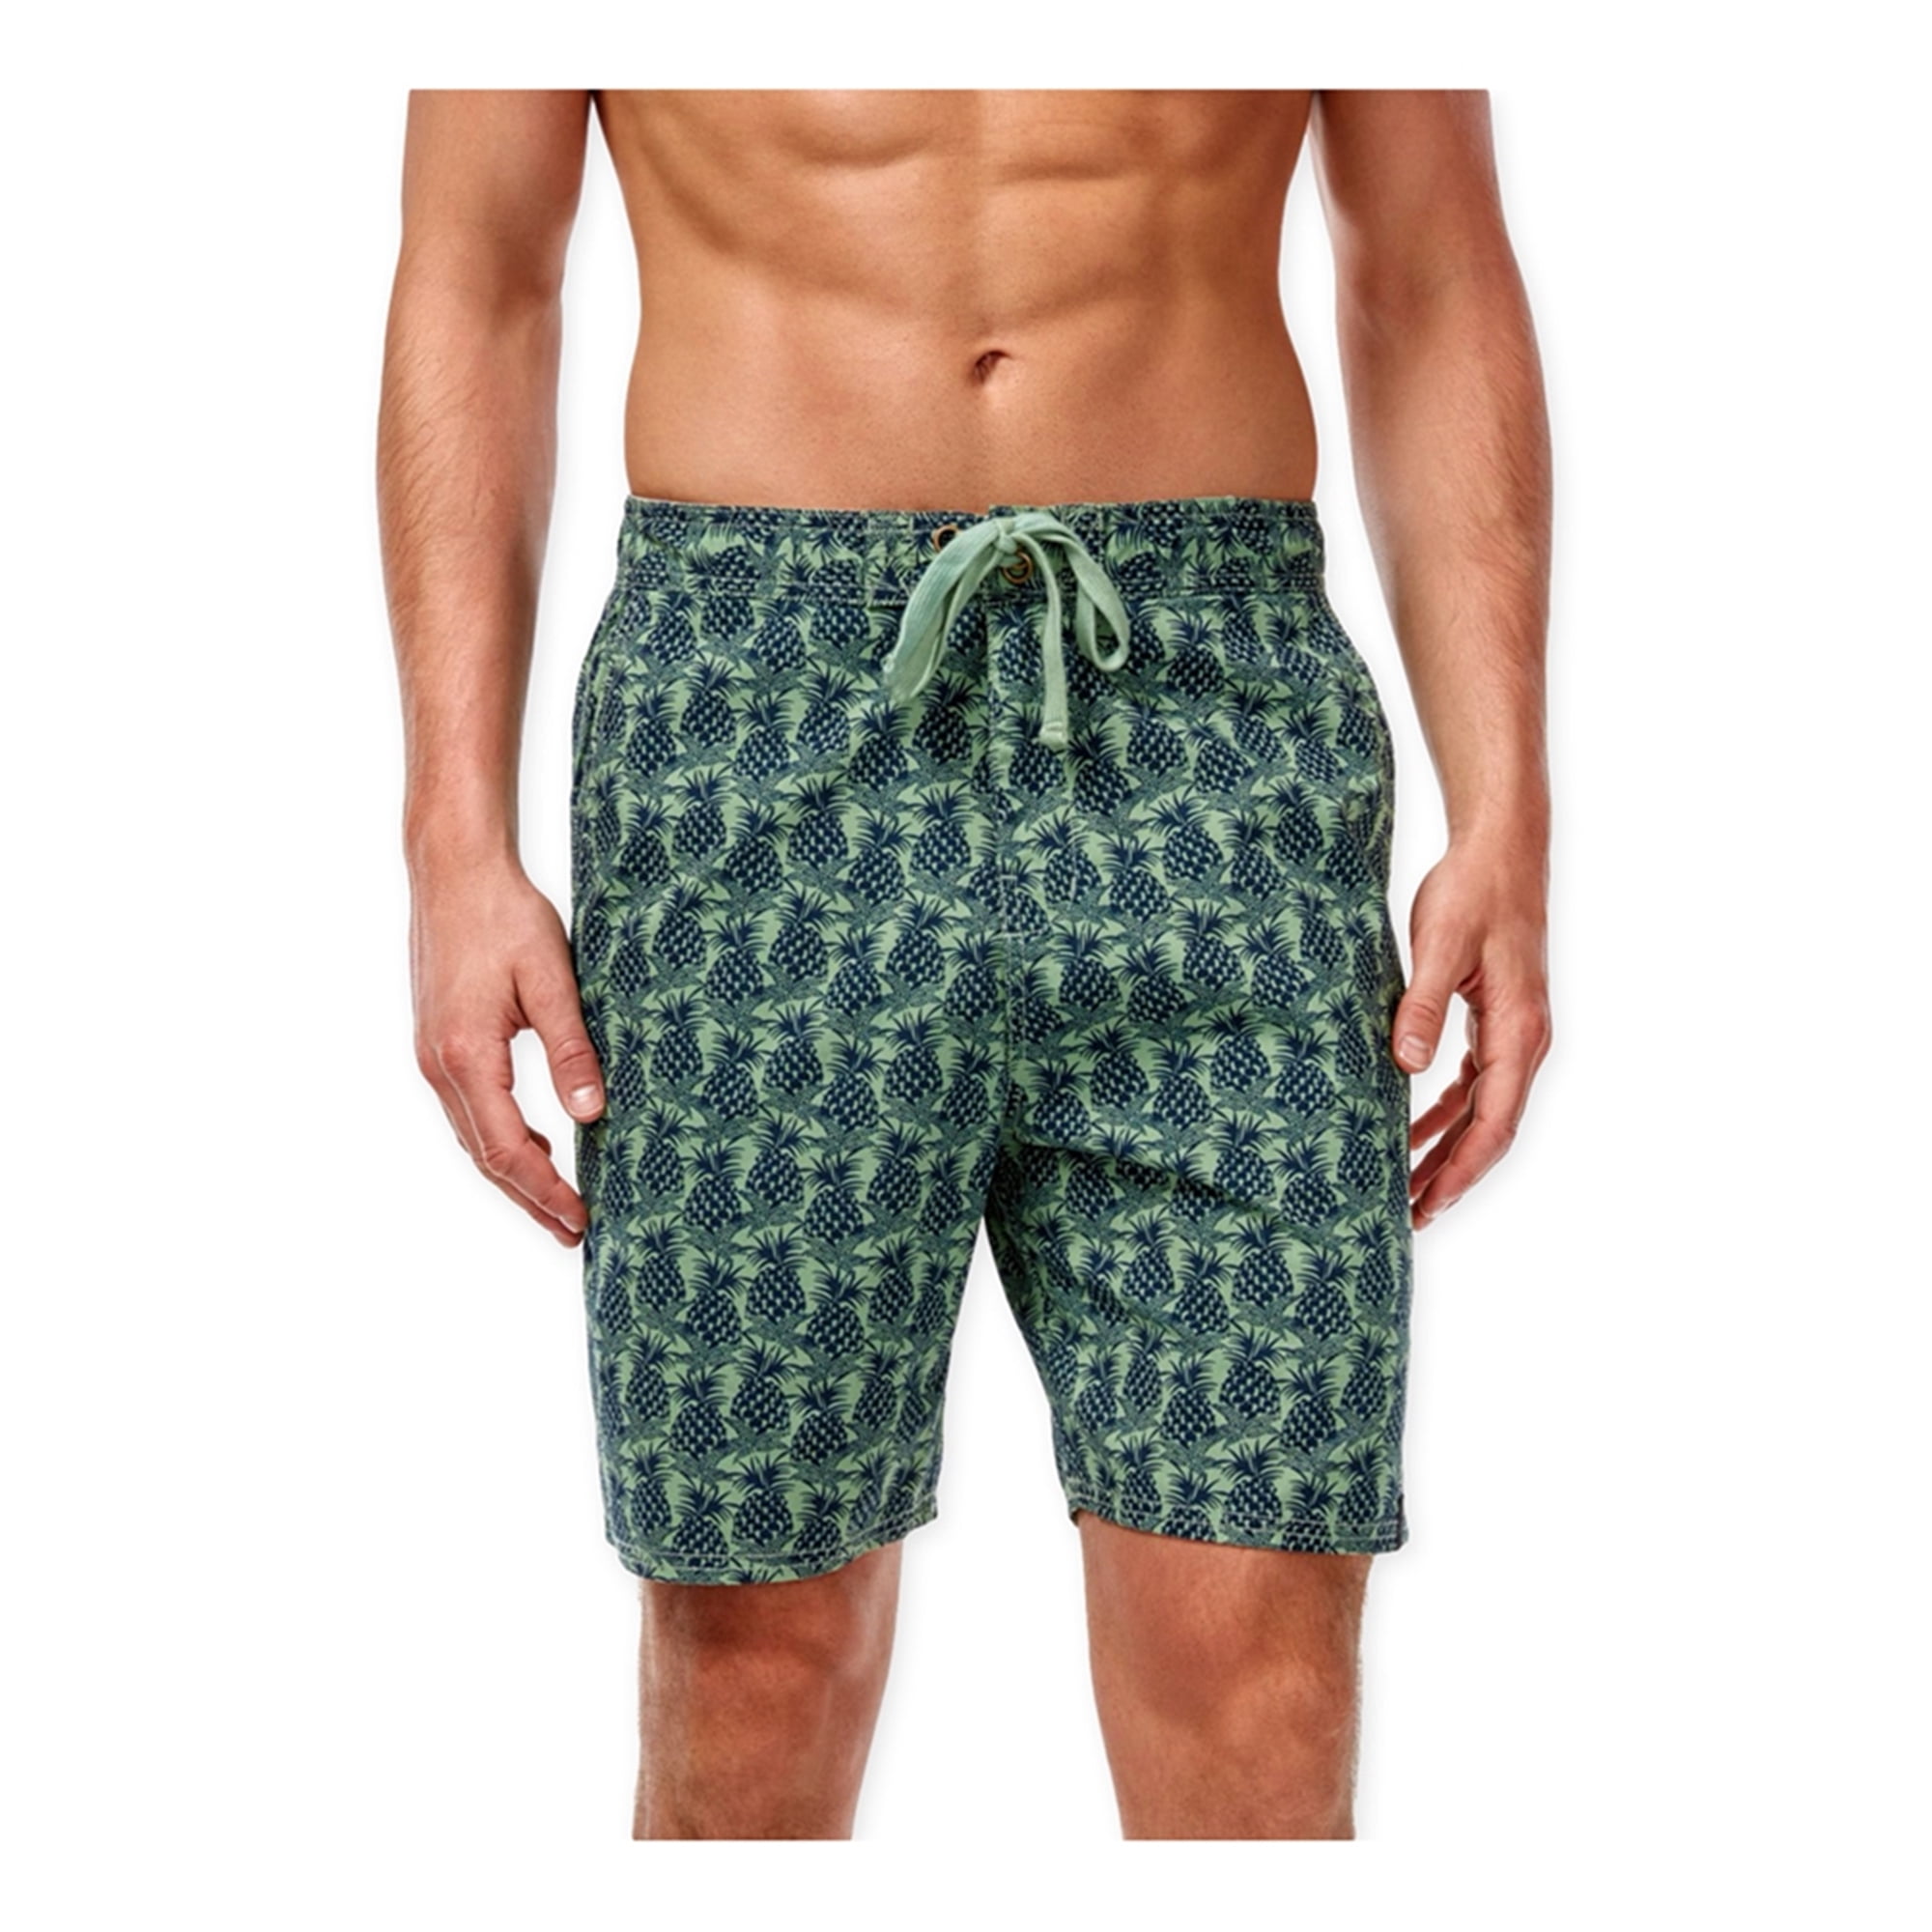 JECERY Mens Swim Trunks Vintage Chritmas Tree with Stripes Quick Dry Board Shorts with Drawstring and Pockets 